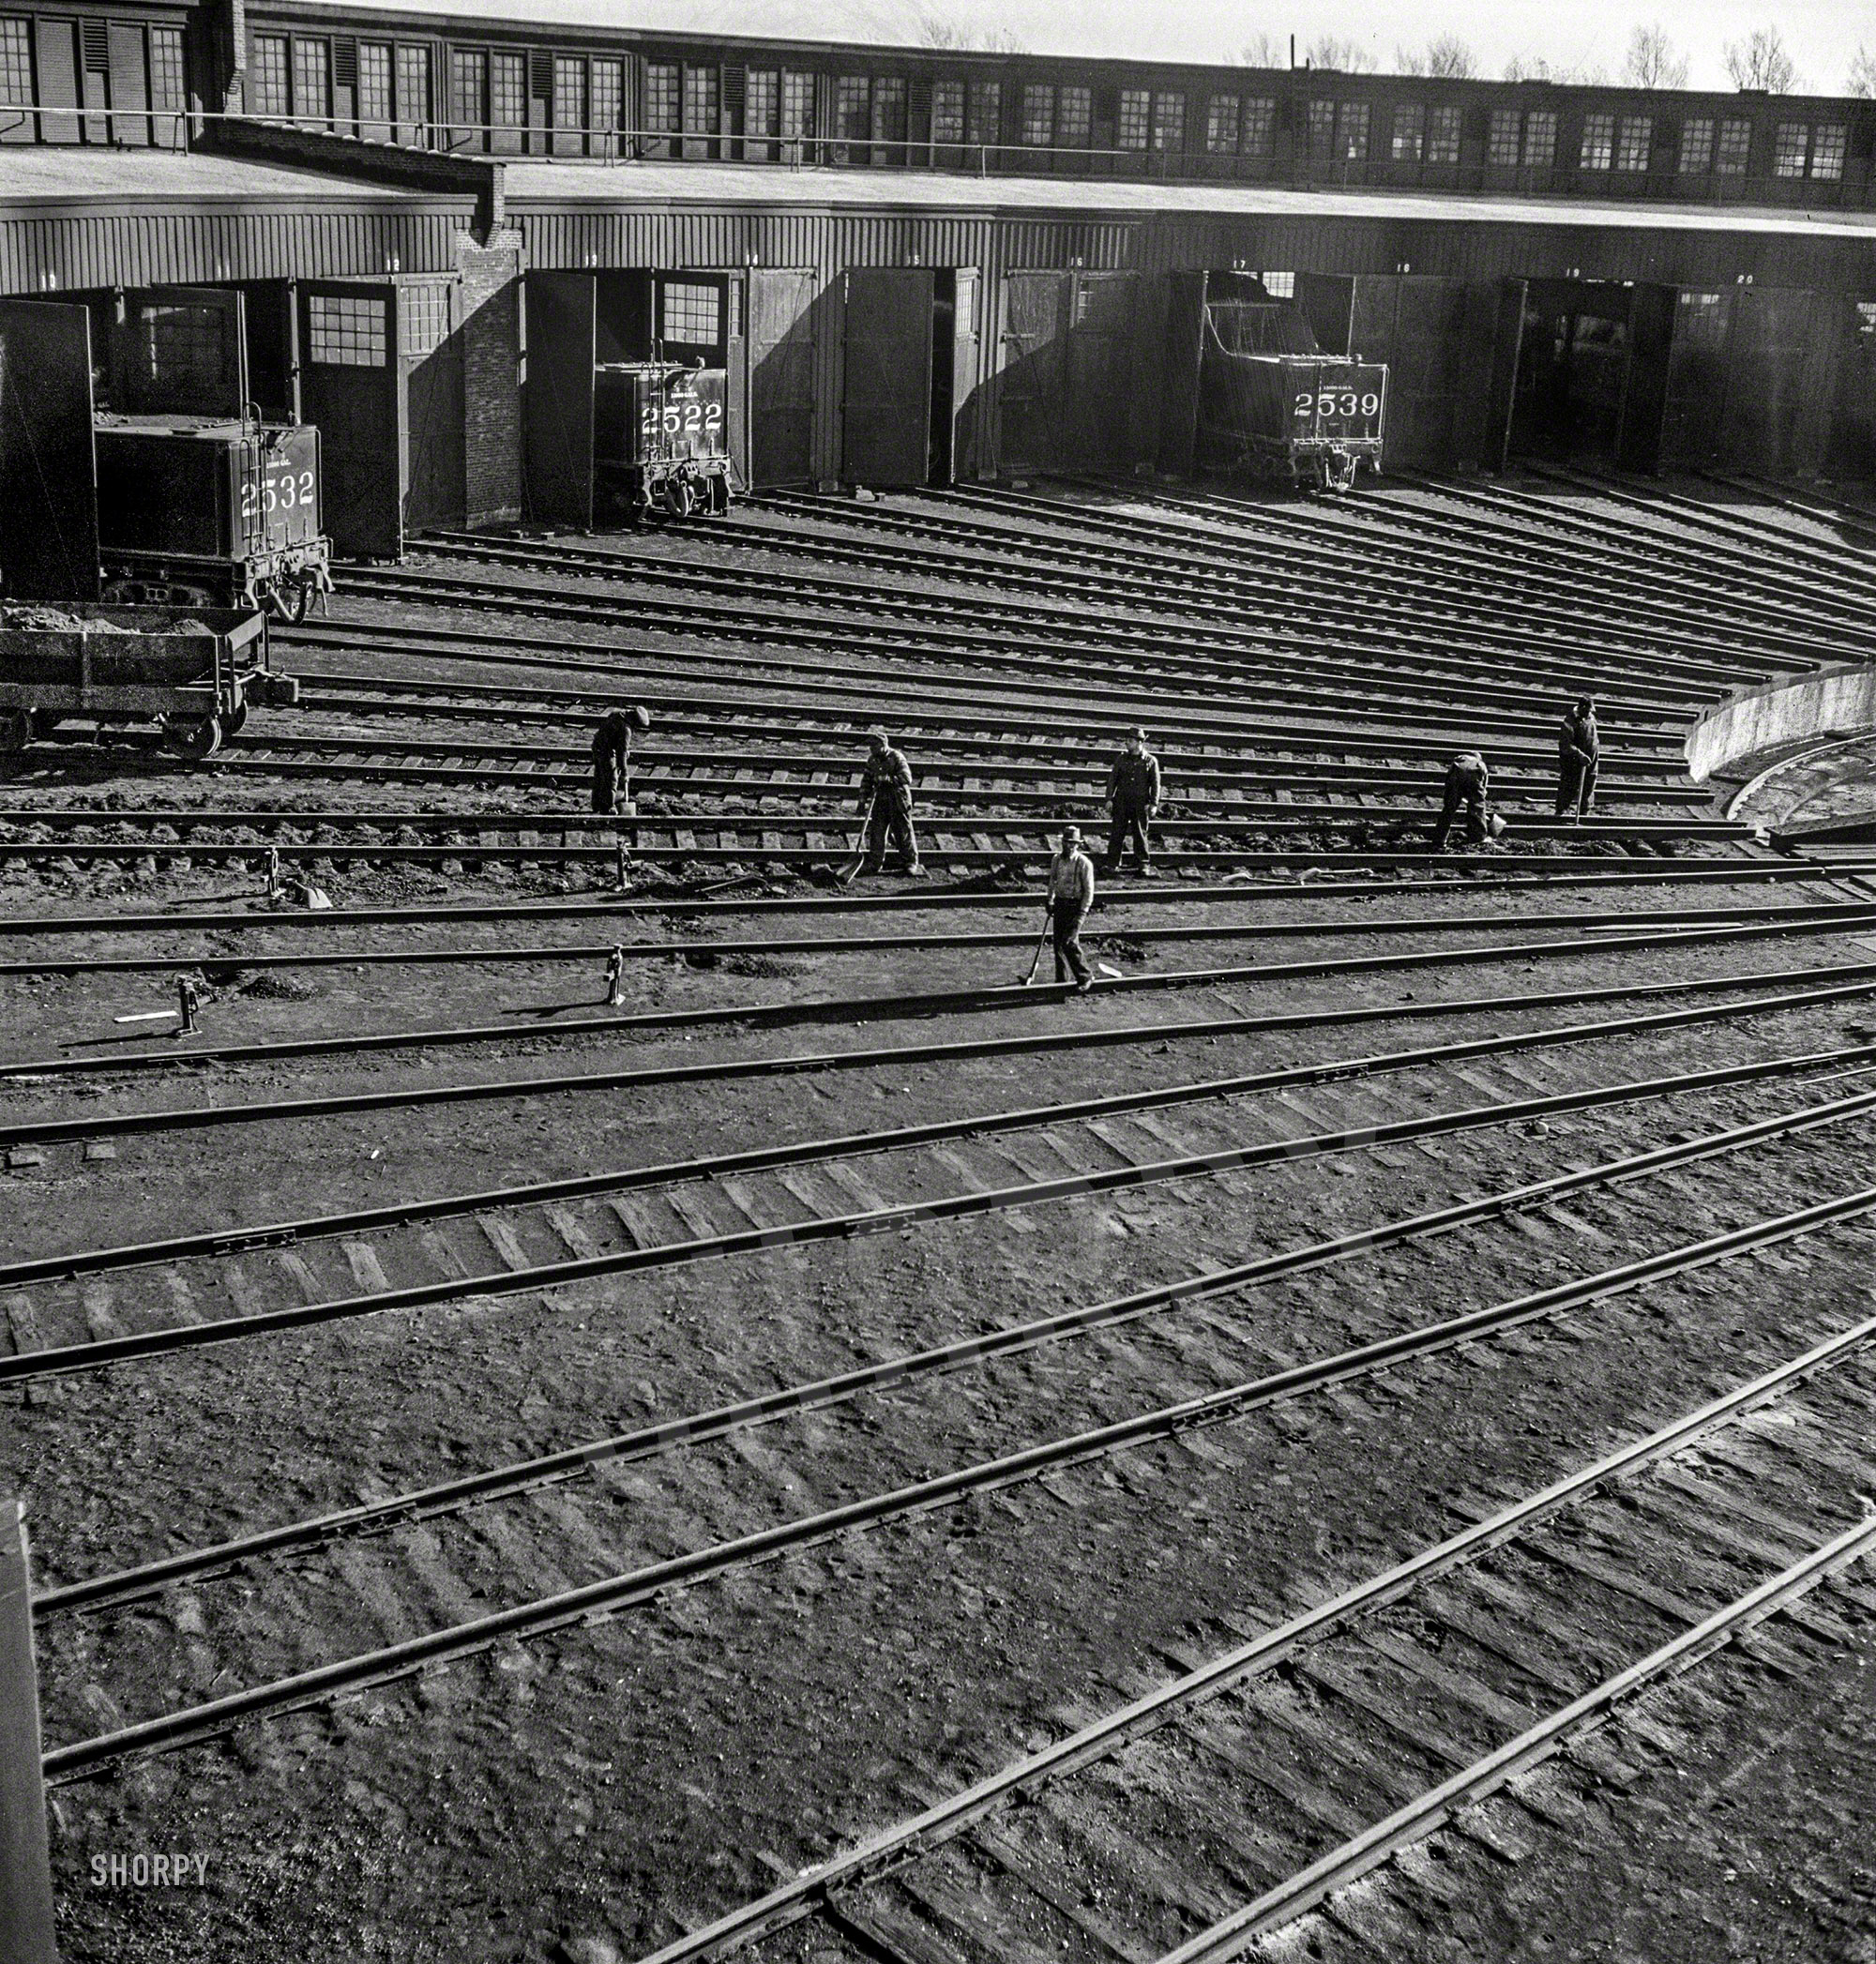 November 1942. "Track crews repairing tracks in the roundhouse at the Illinois Central rail yard, Chicago." Photo by Jack Delano for the OWI. View full size.